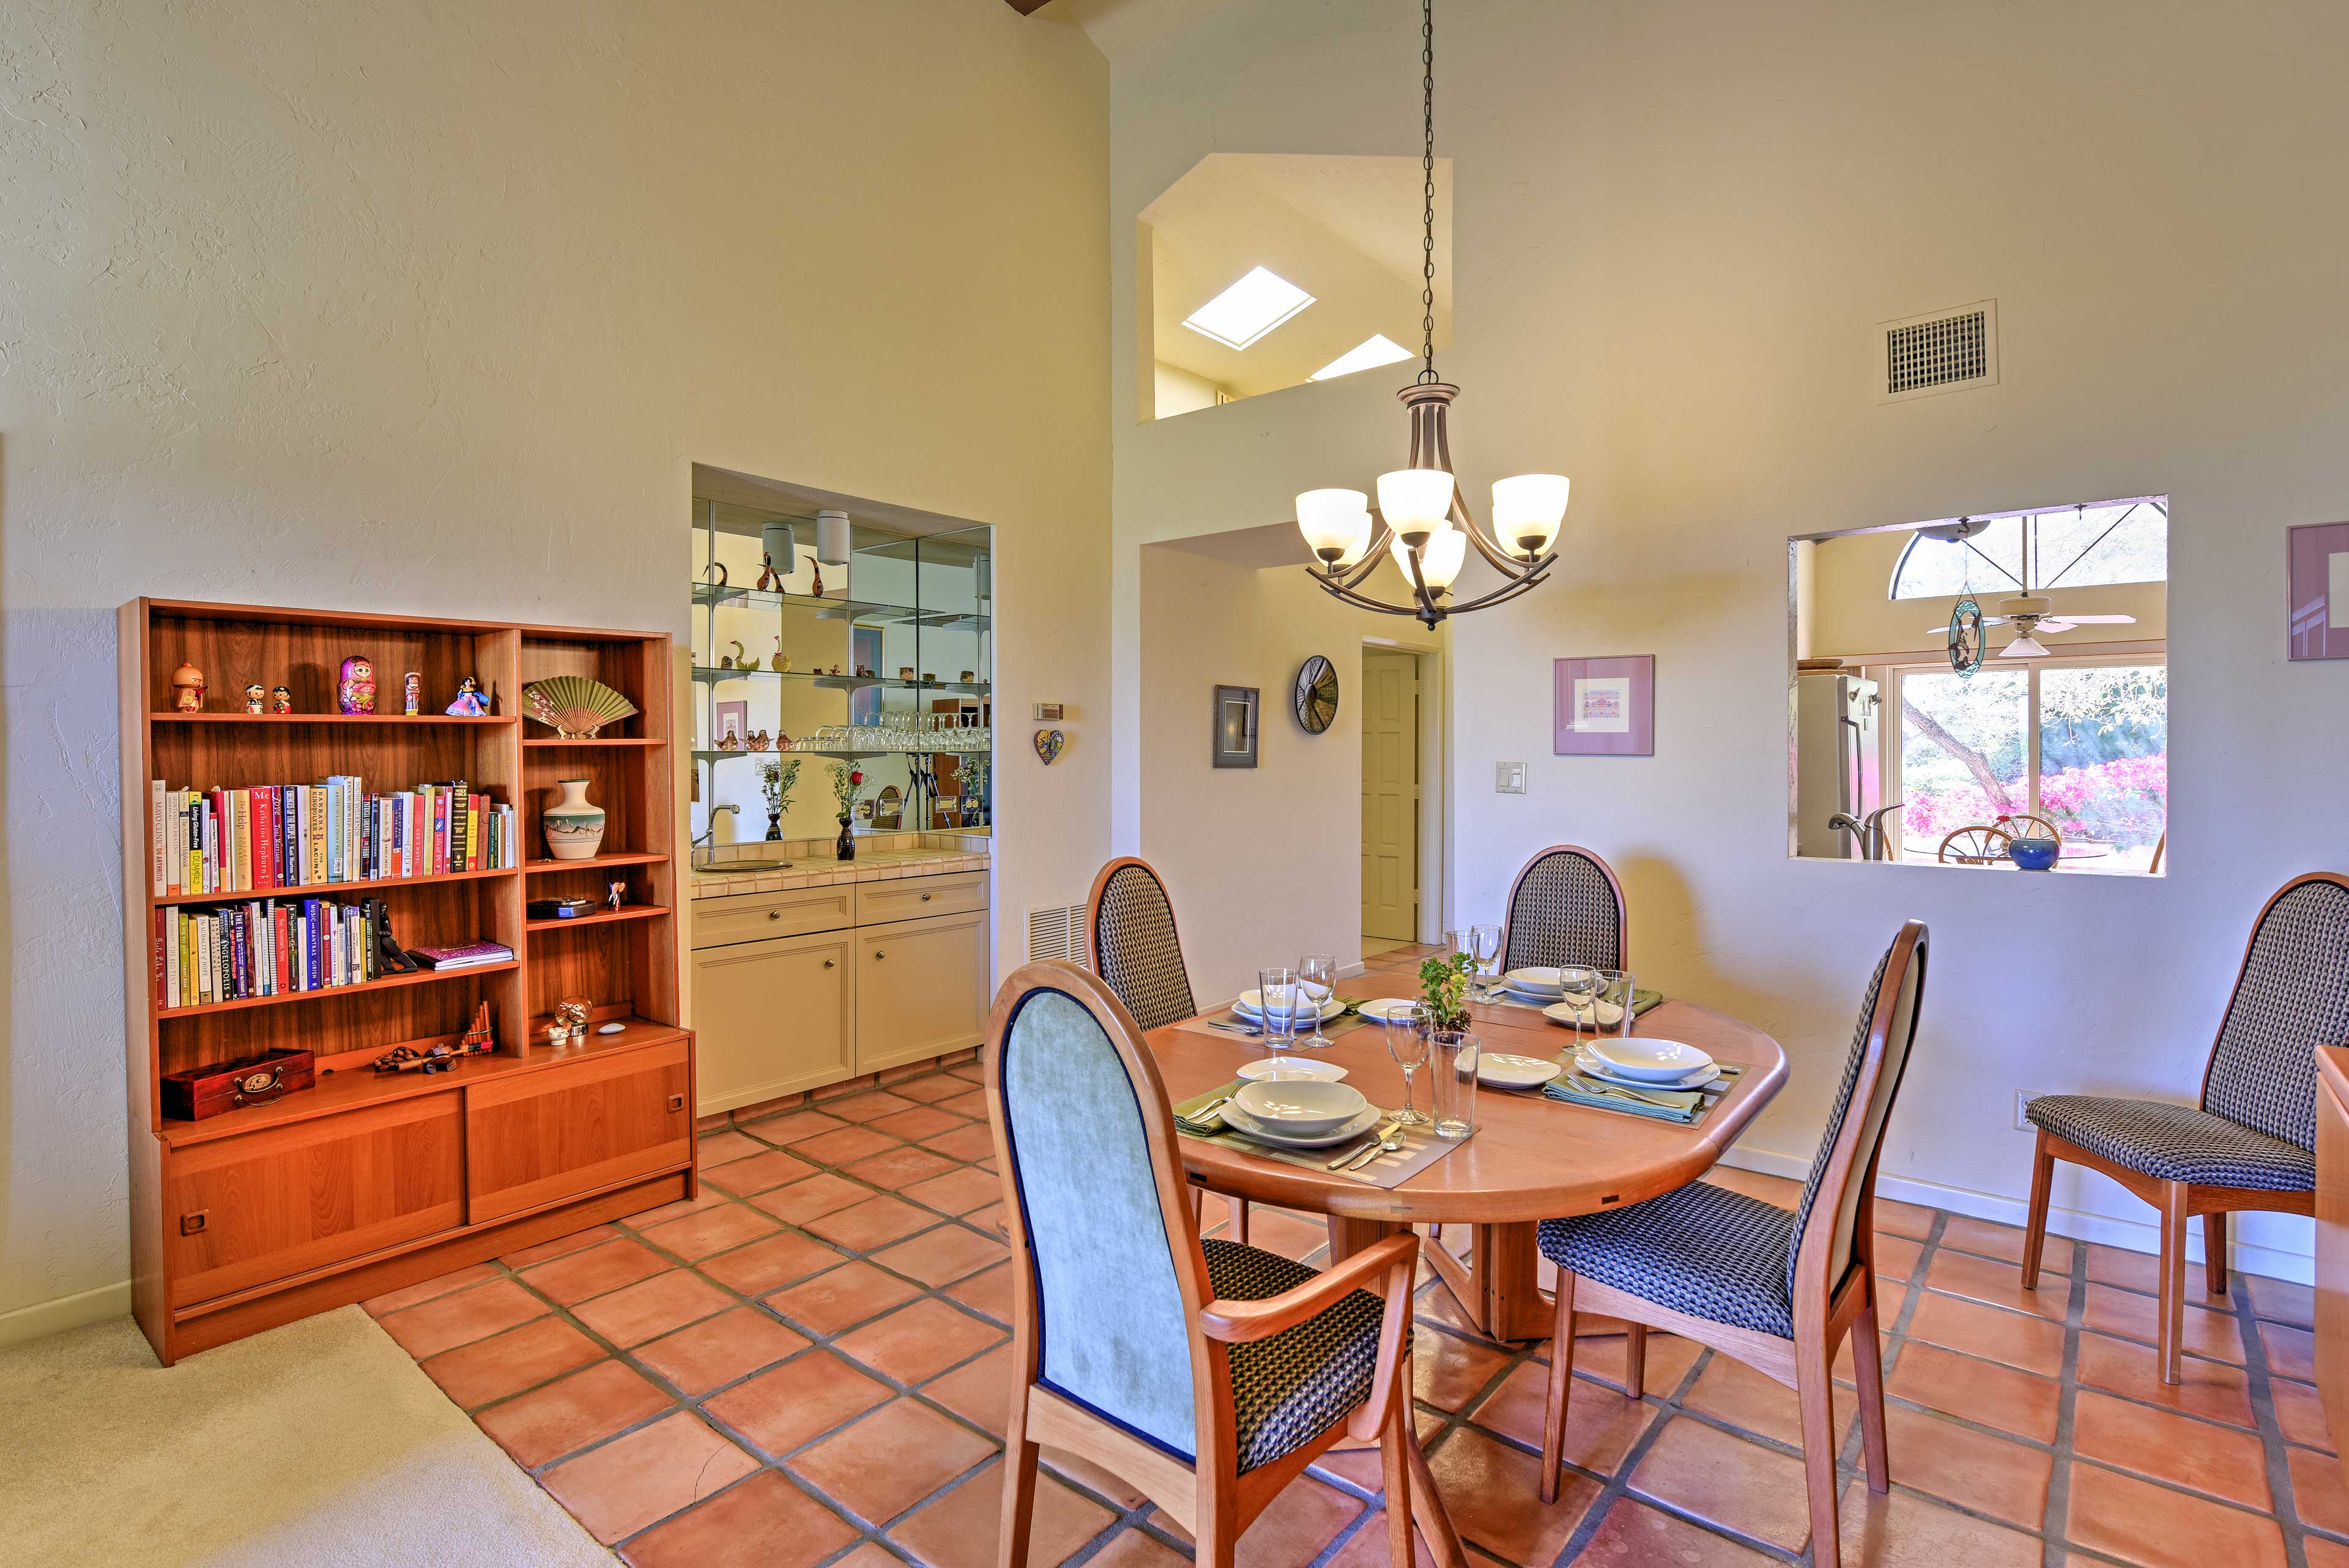 You can still socialize with your traveling companions from the kitchen through the opening in the wall while they enjoy their meal at the dining room table set for 4.